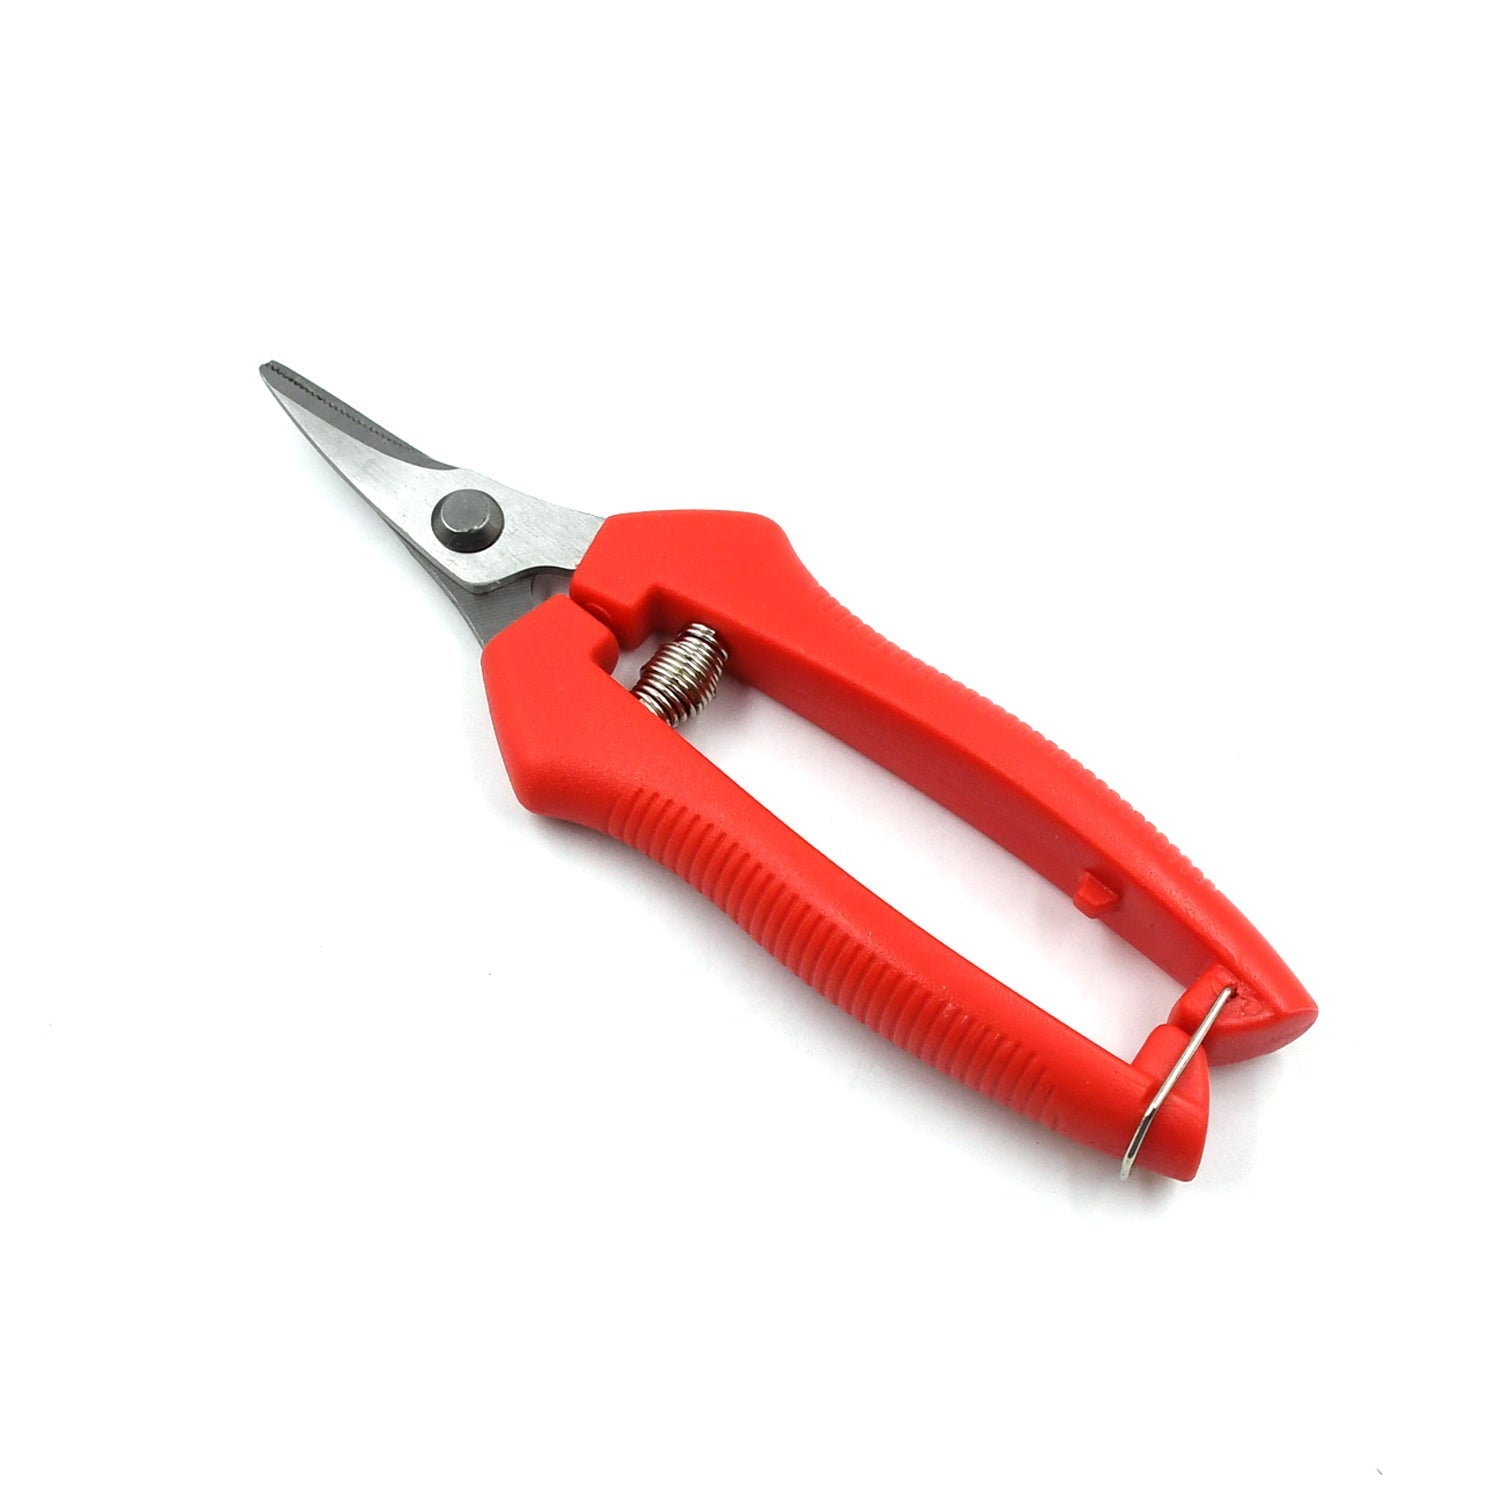 9135 Heavy Duty Stainless Steel Cutter, Nonƒ??slip Trimming Scissors Durable Not Easy To Wear for Gardening Pruning Of Fruit Trees Flowers and Plants